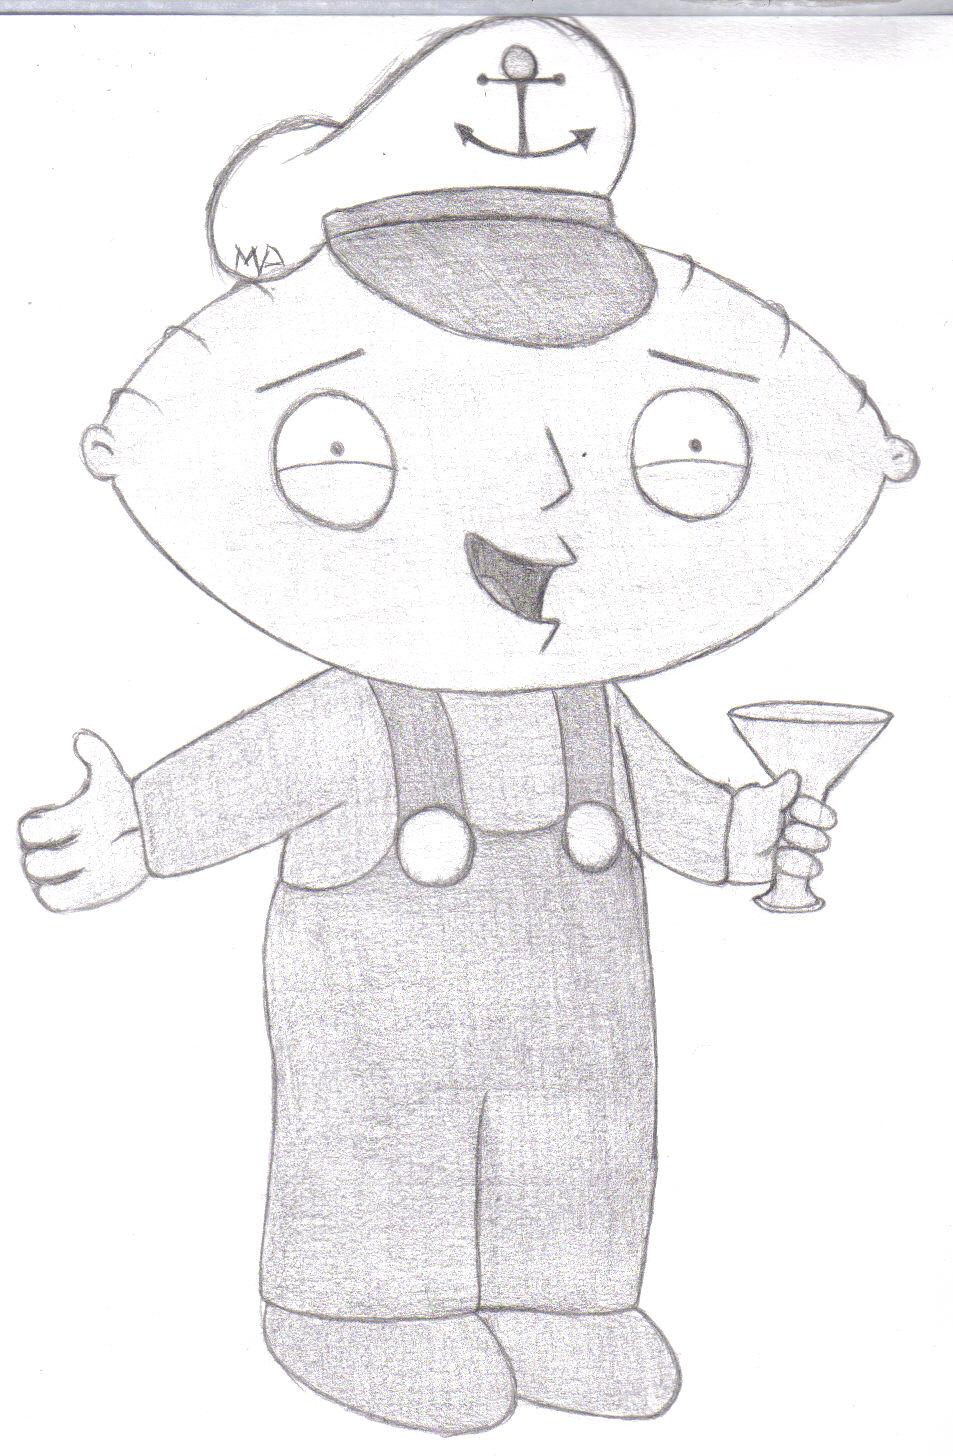 Stewie with a martini by MitchellP